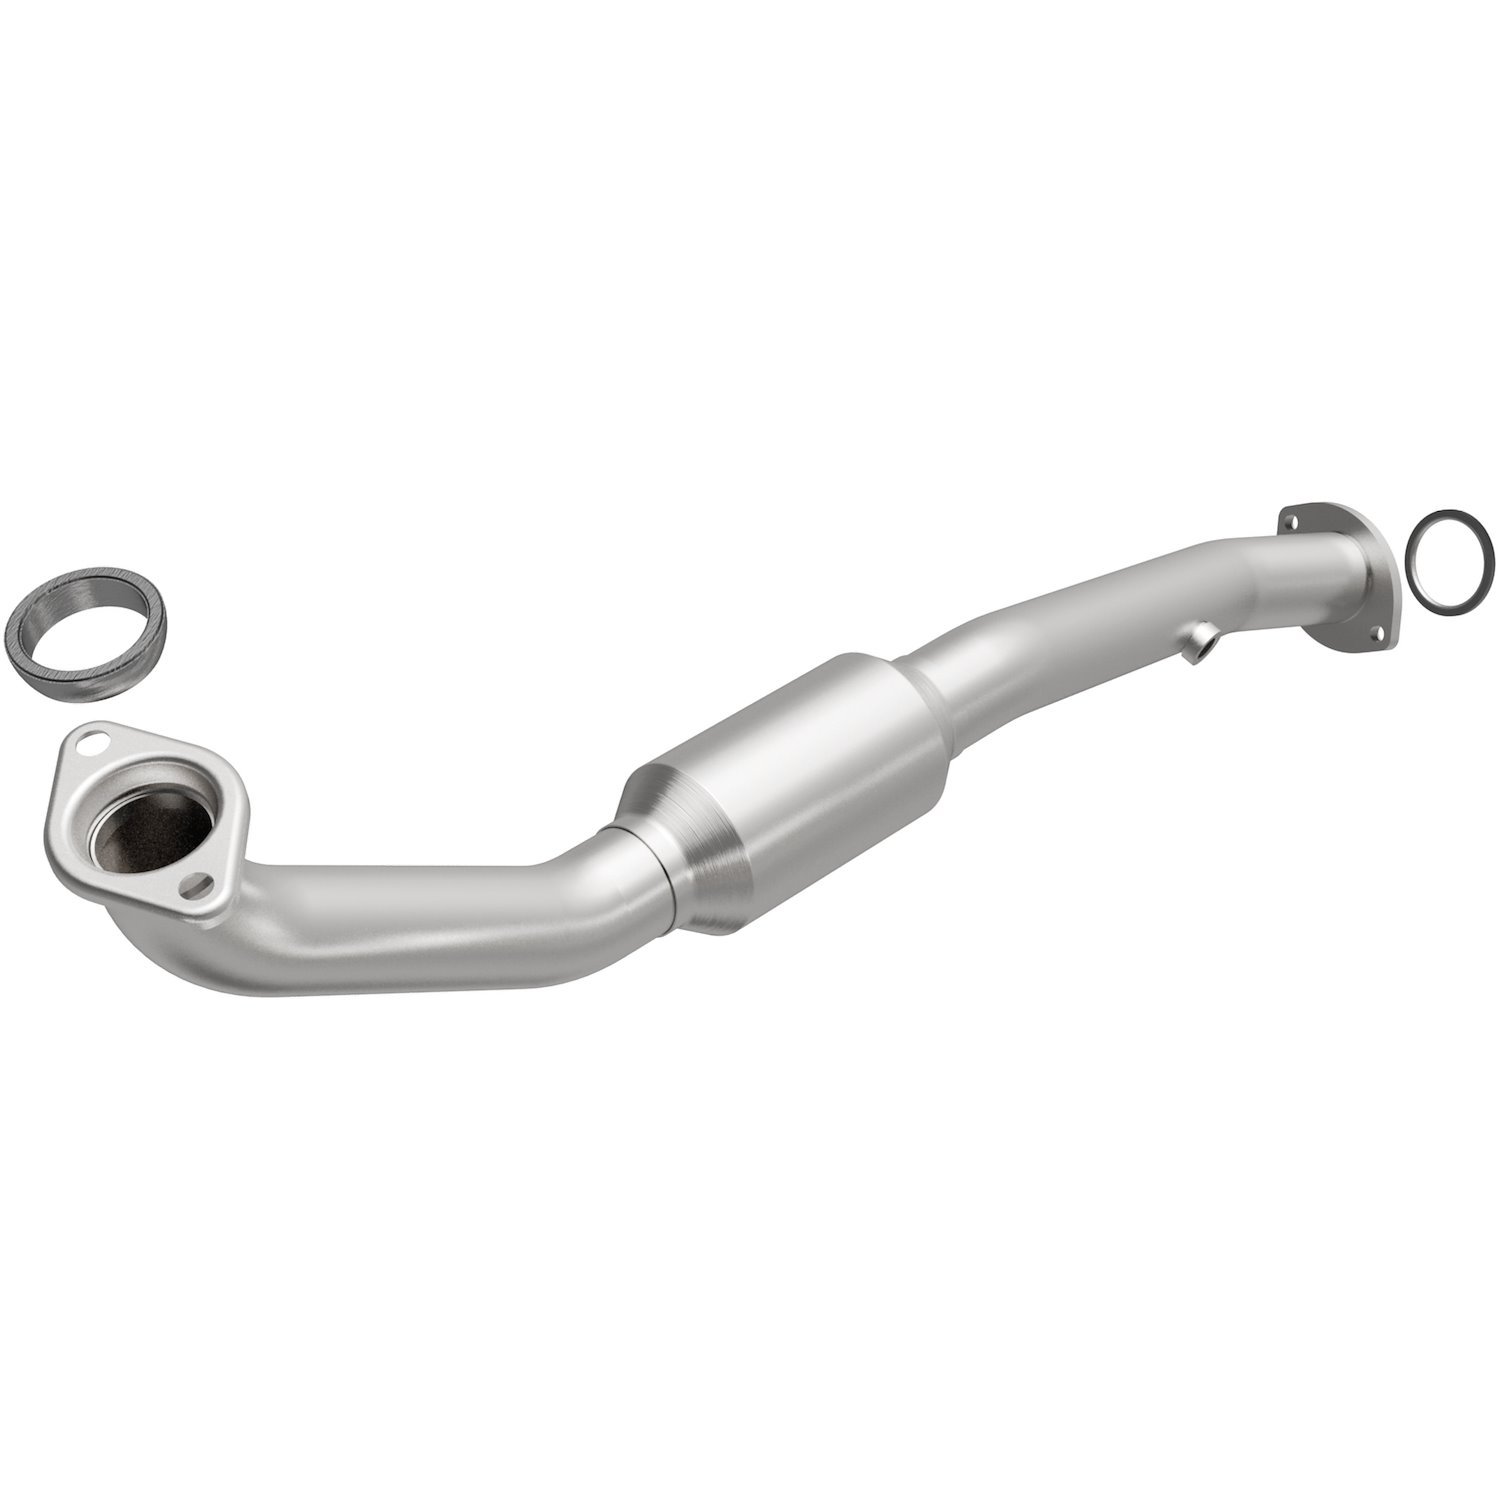 2009-2013 Toyota Highlander California Grade CARB Compliant Direct-Fit Catalytic Converter